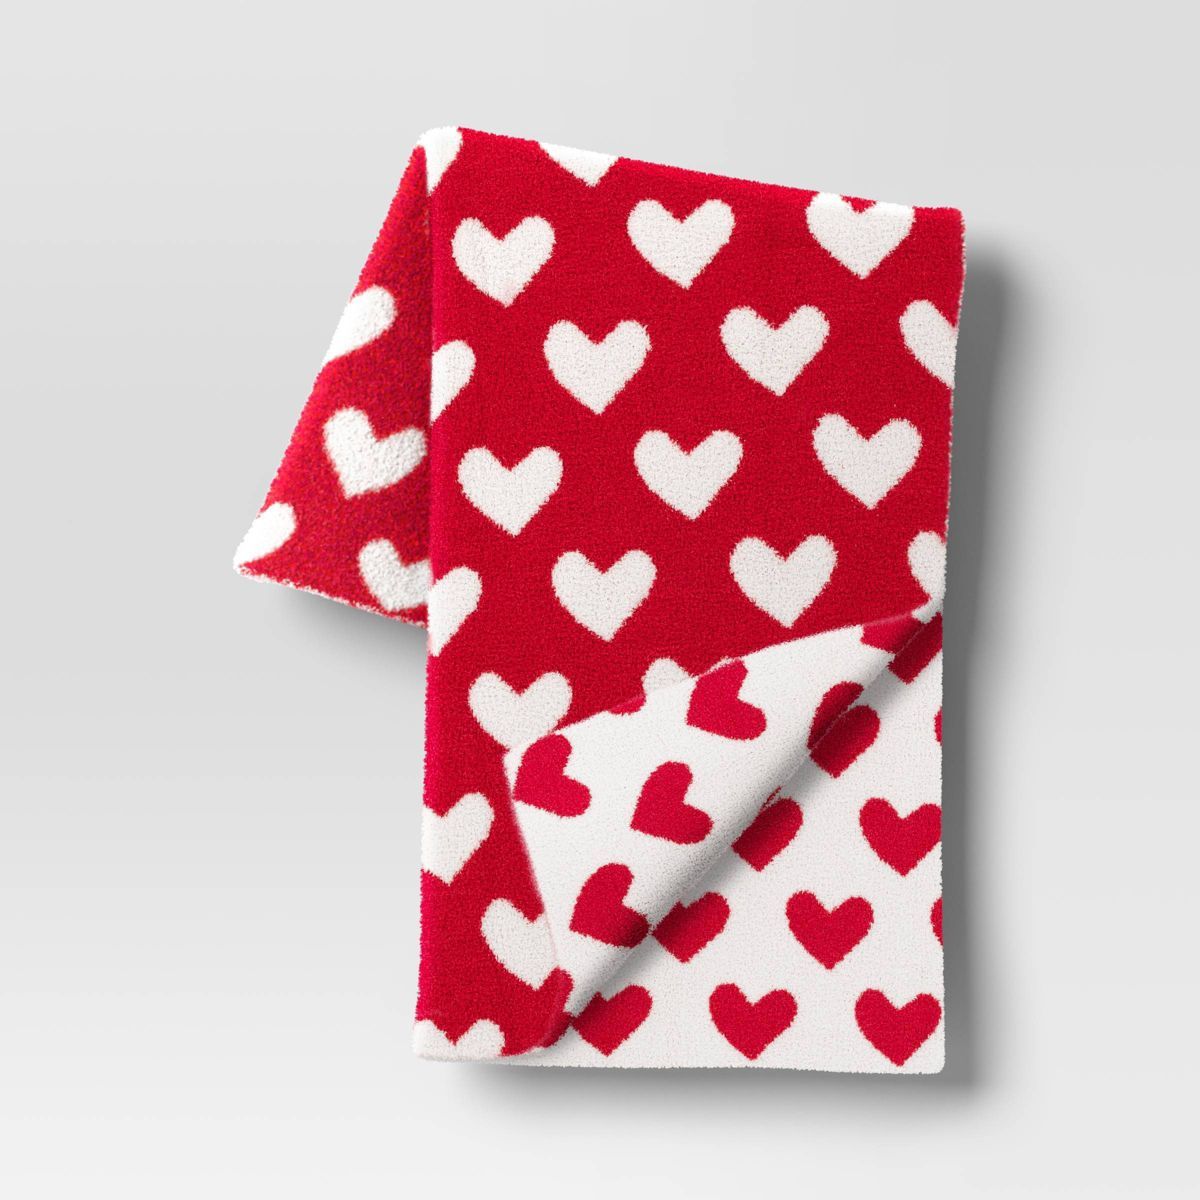 Reversible Cozy Feathery Knit Hearts Throw Blanket Ivory/Red - Threshold™ | Target